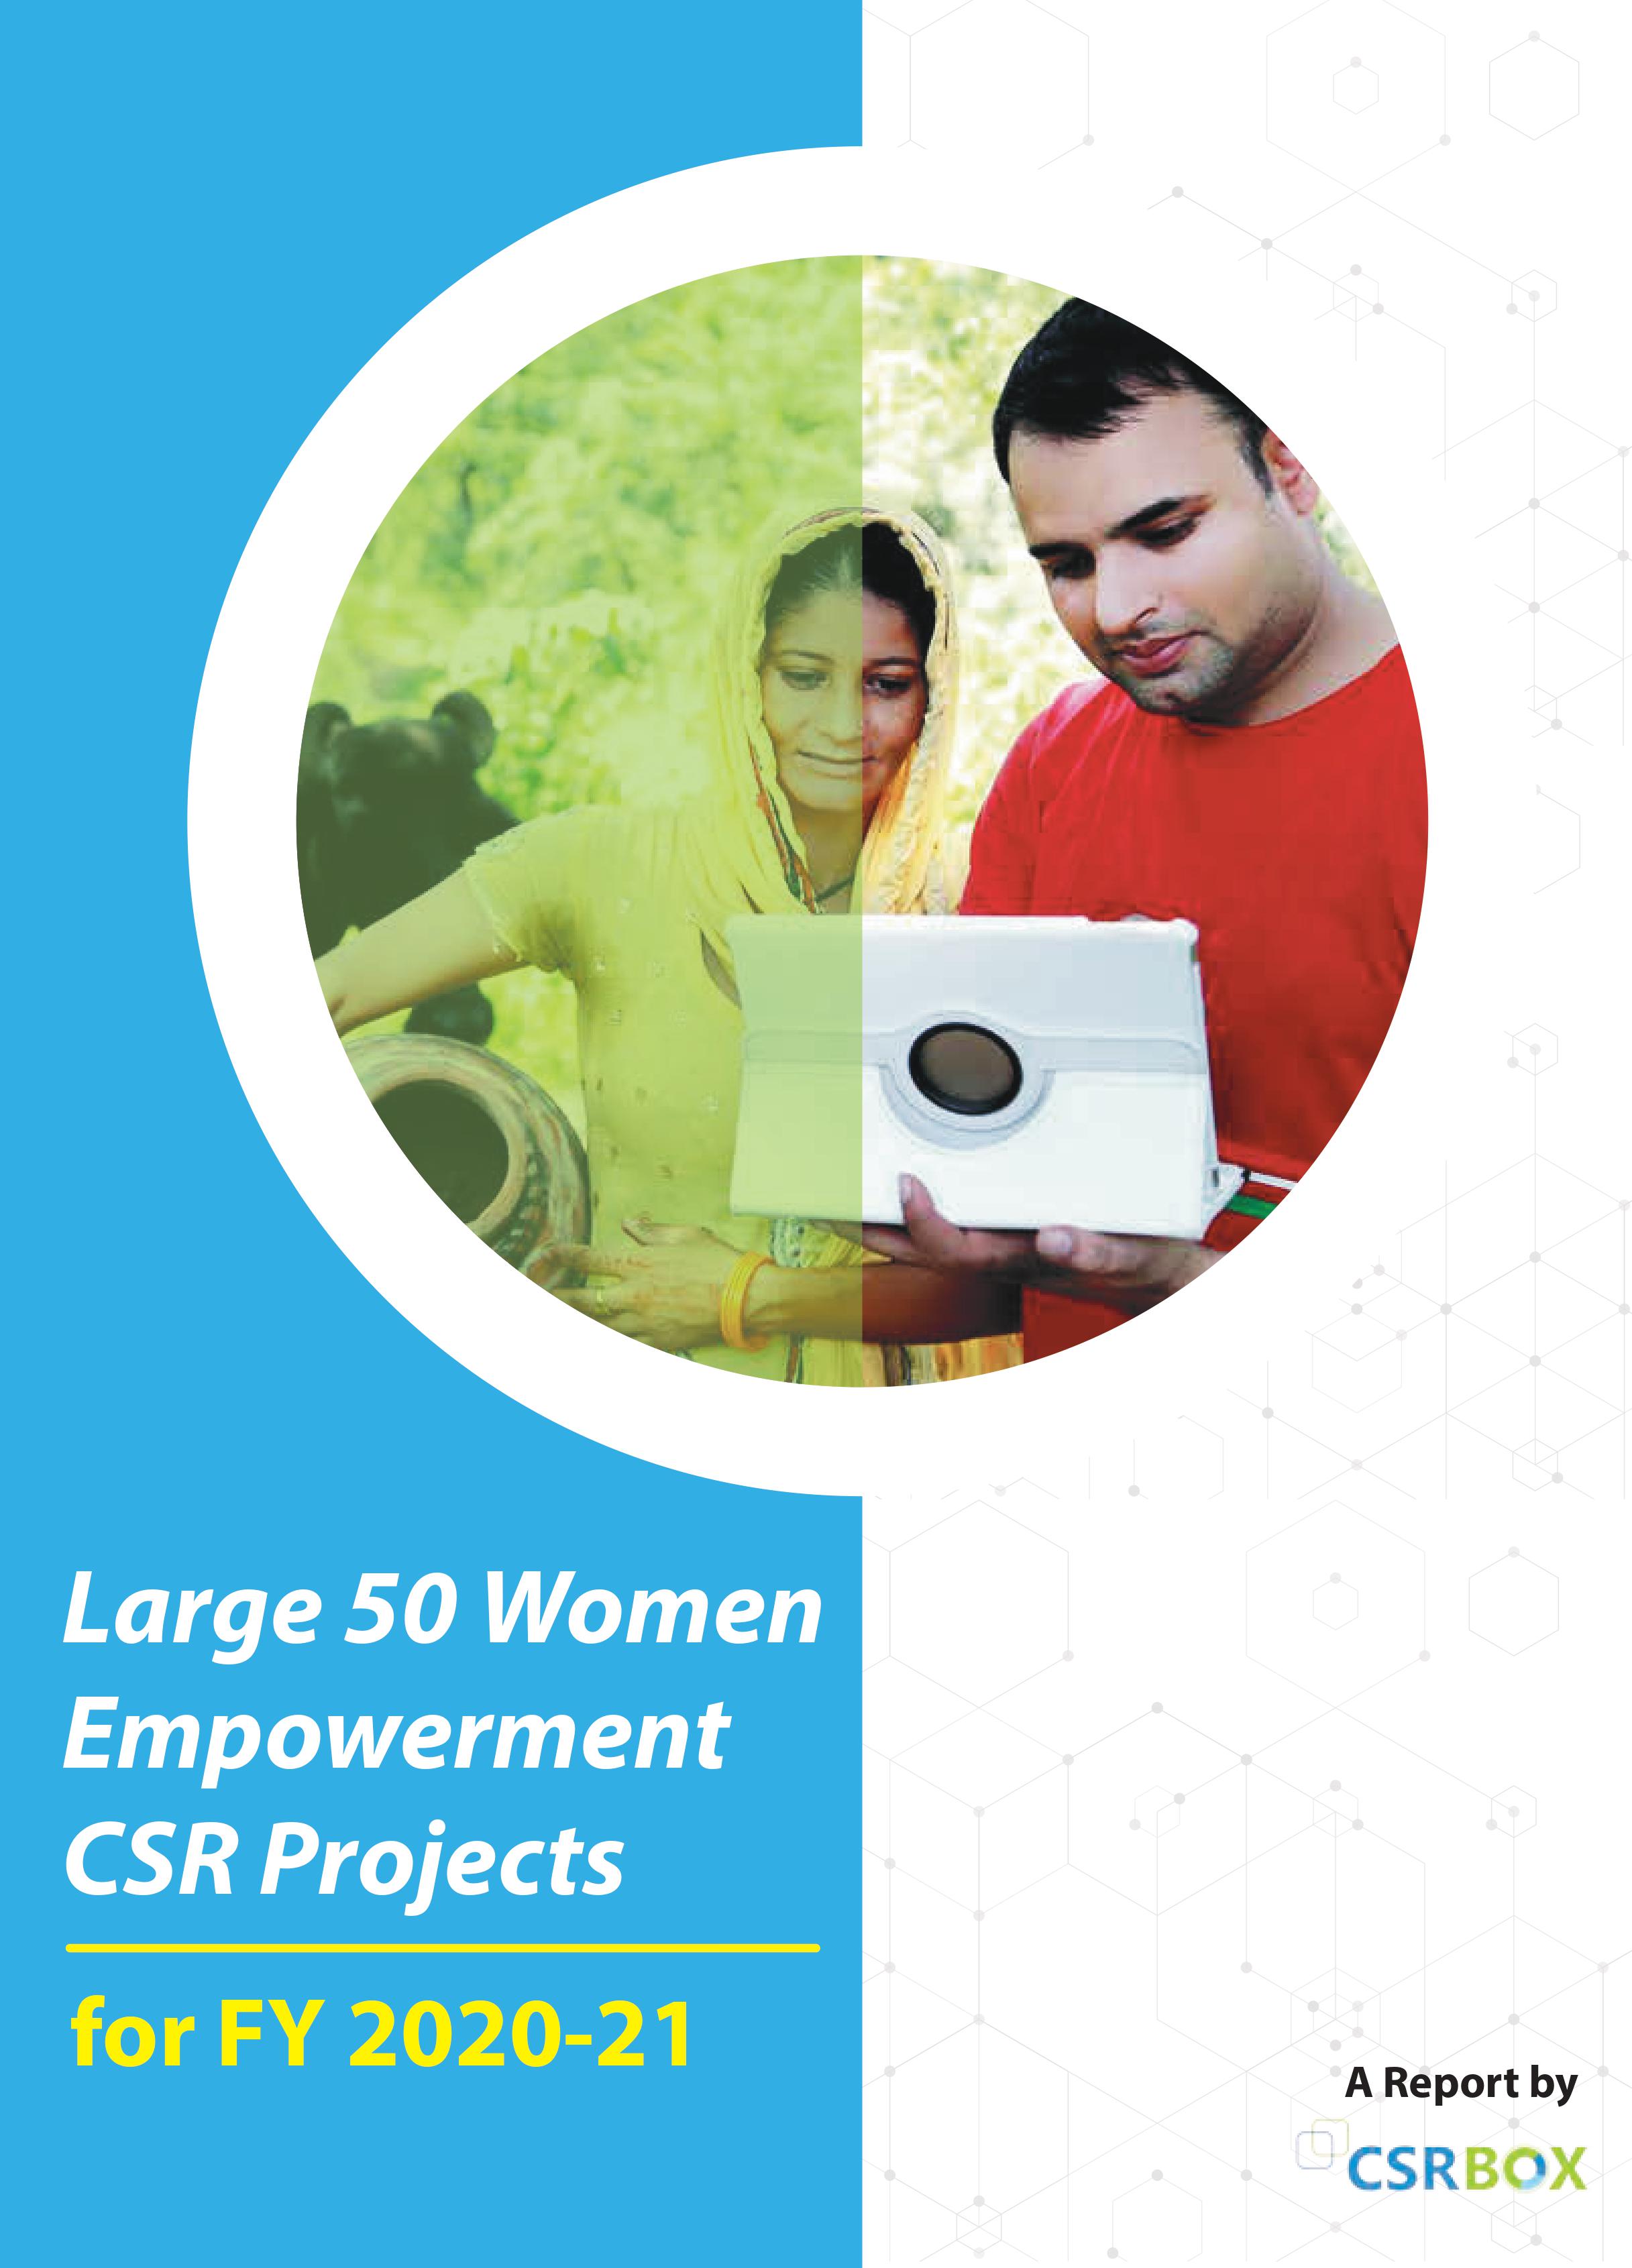 Large 50 Women Empowerment CSR Projects in India FY 2020-21